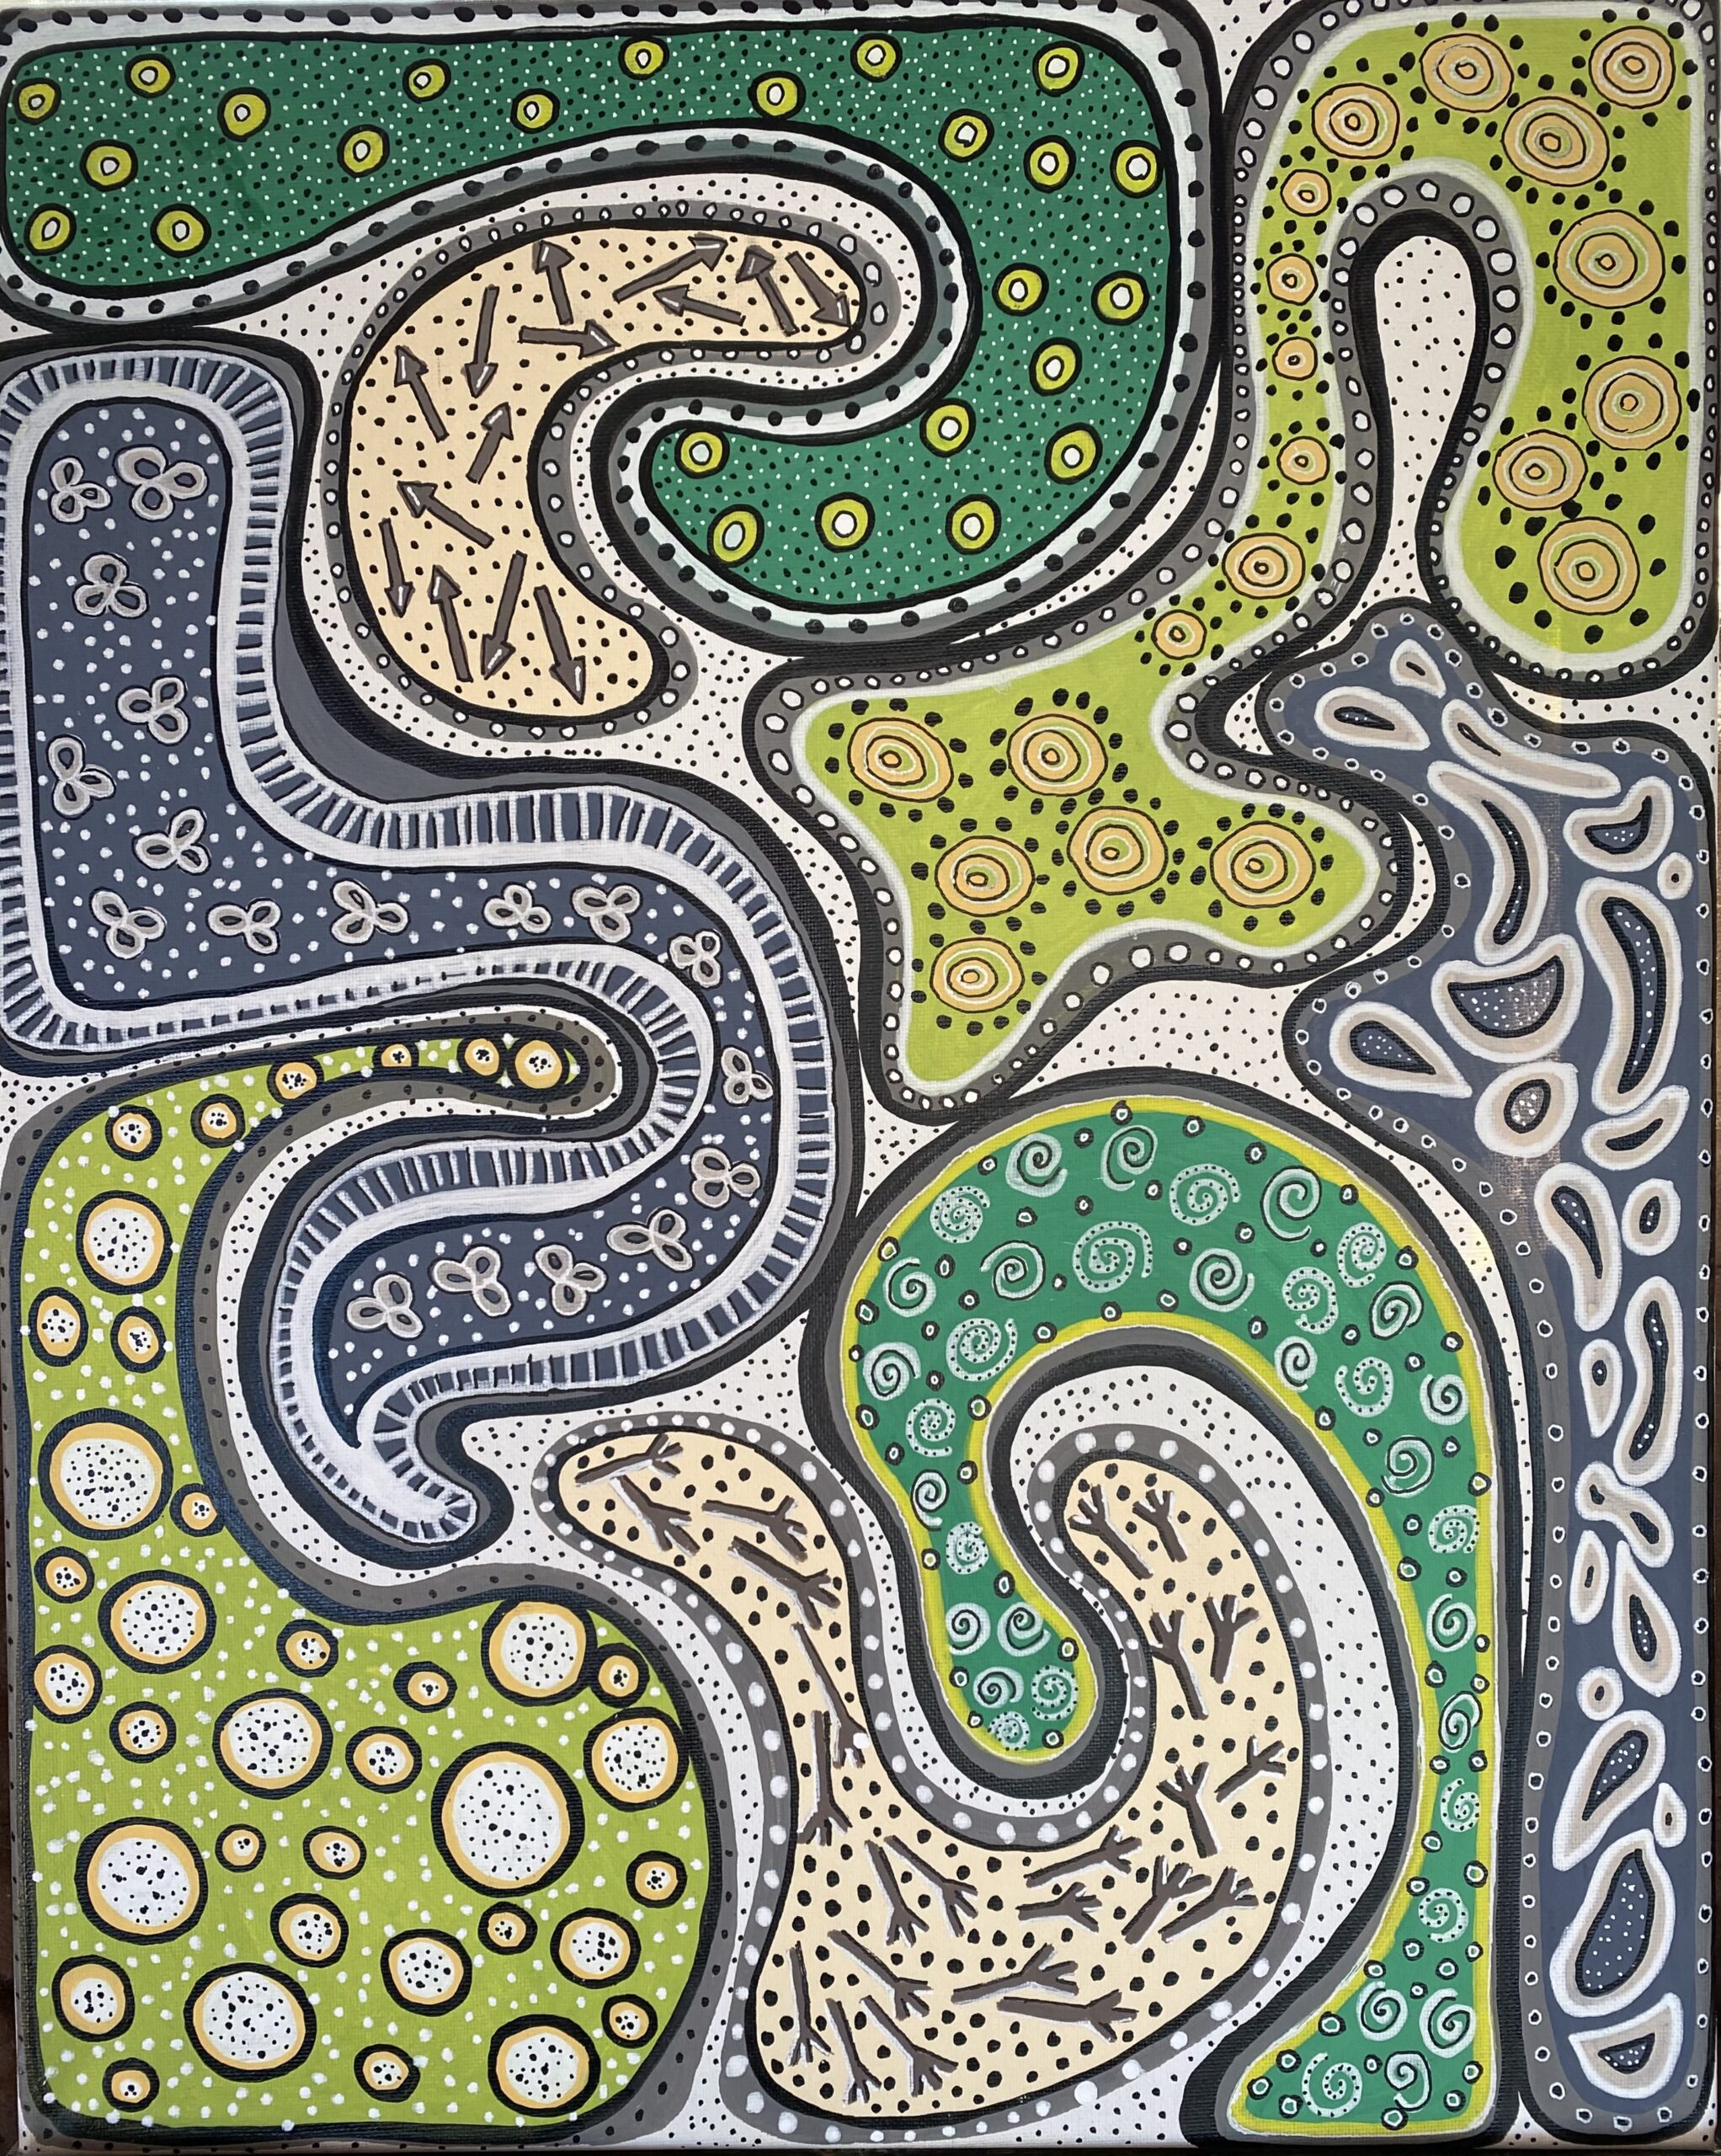 This piece is my first larger work in recent years. The title “Adelaide” Is homage to the city in Australia. Green, Yellow and Tan ameba shaped blobs fit onto the canvas like a puzzle coming together. Inside each shape are other shapes like a fractal image.